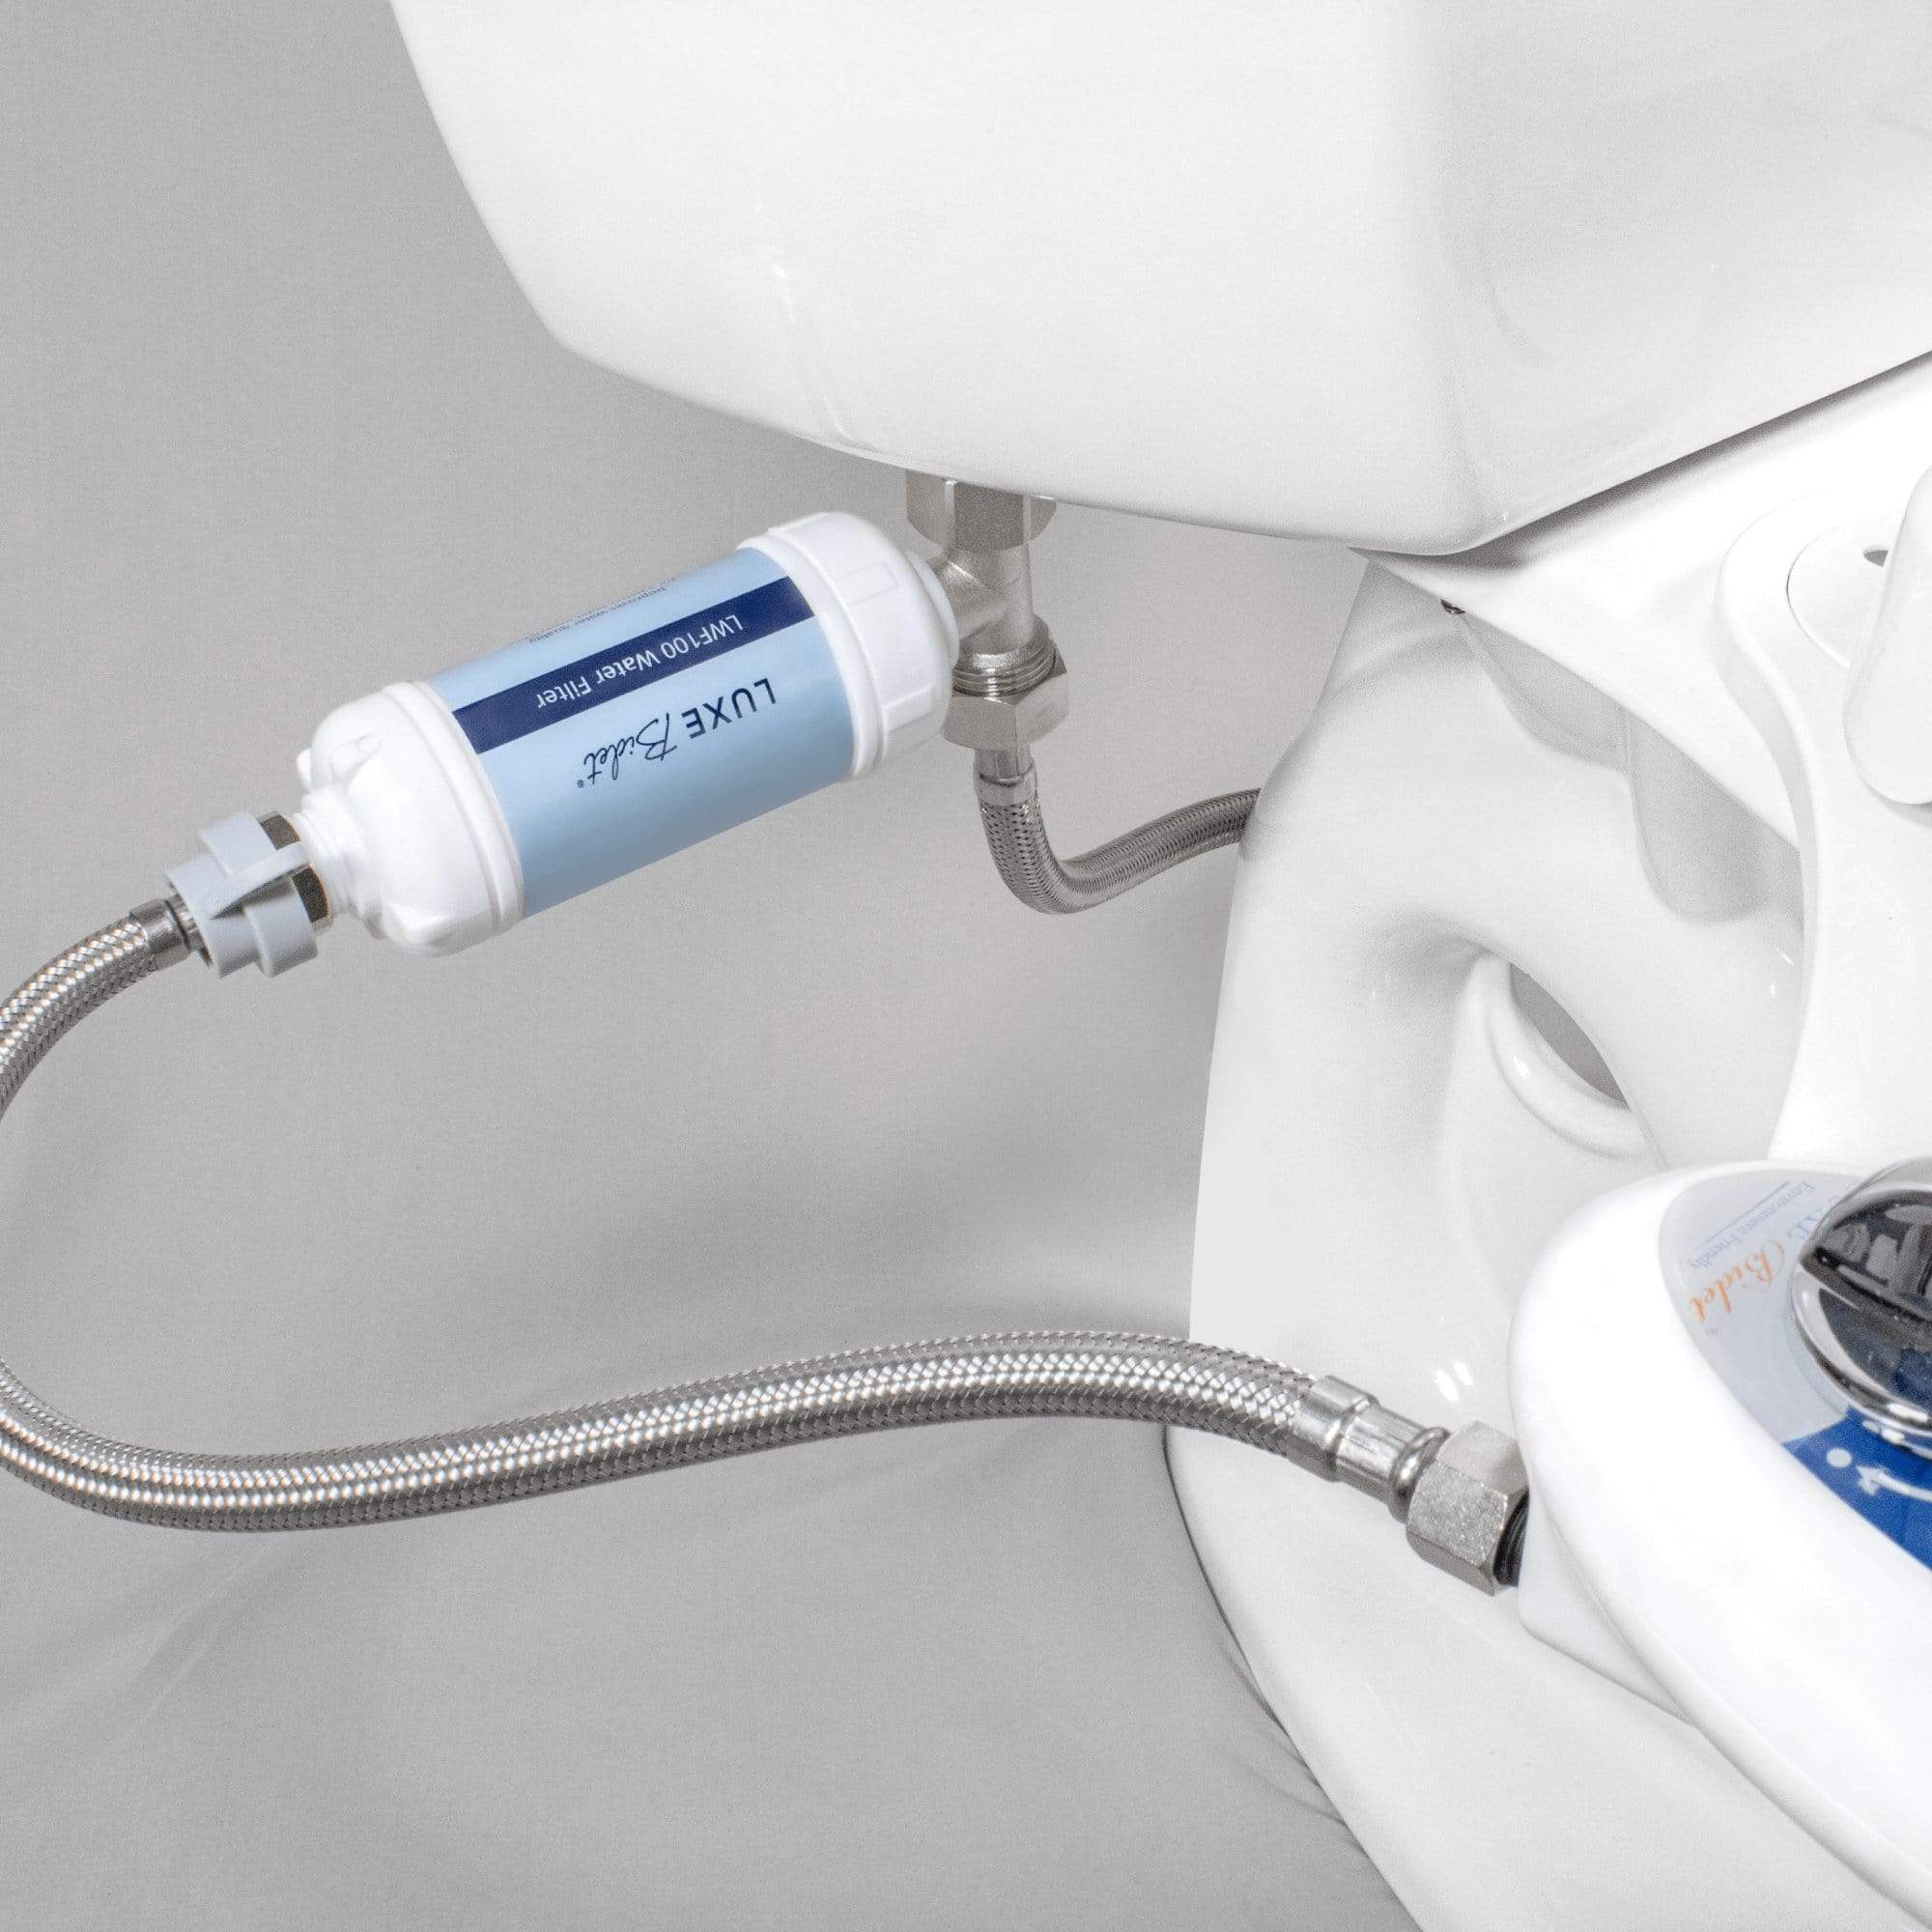 LUXE Bidet 4-in-1 Filtration Water Filter installed for a NEO Series bidet.